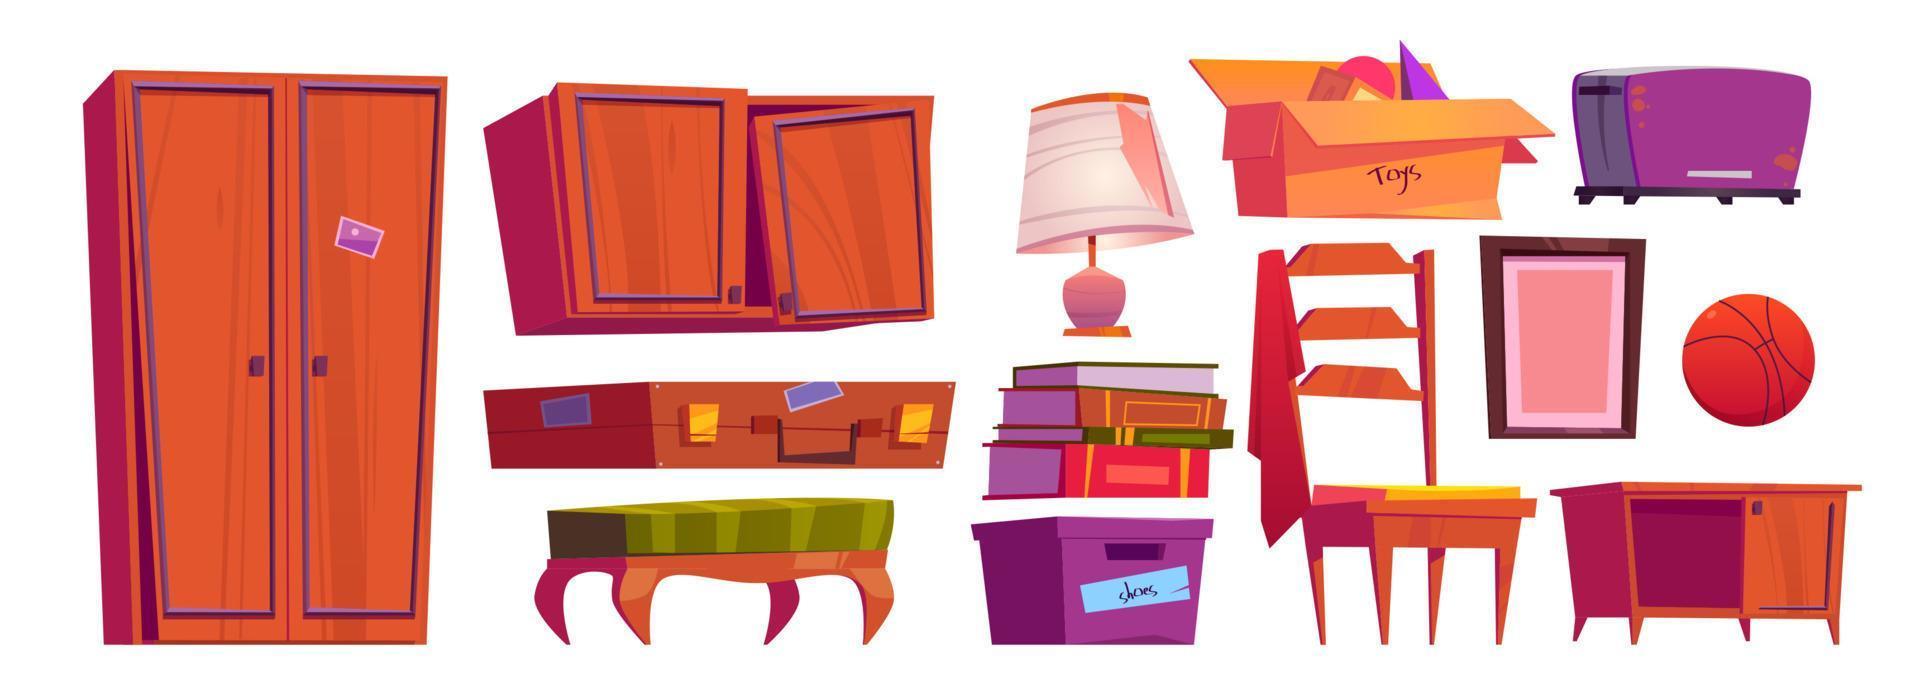 Old furniture, archive items on house attic vector